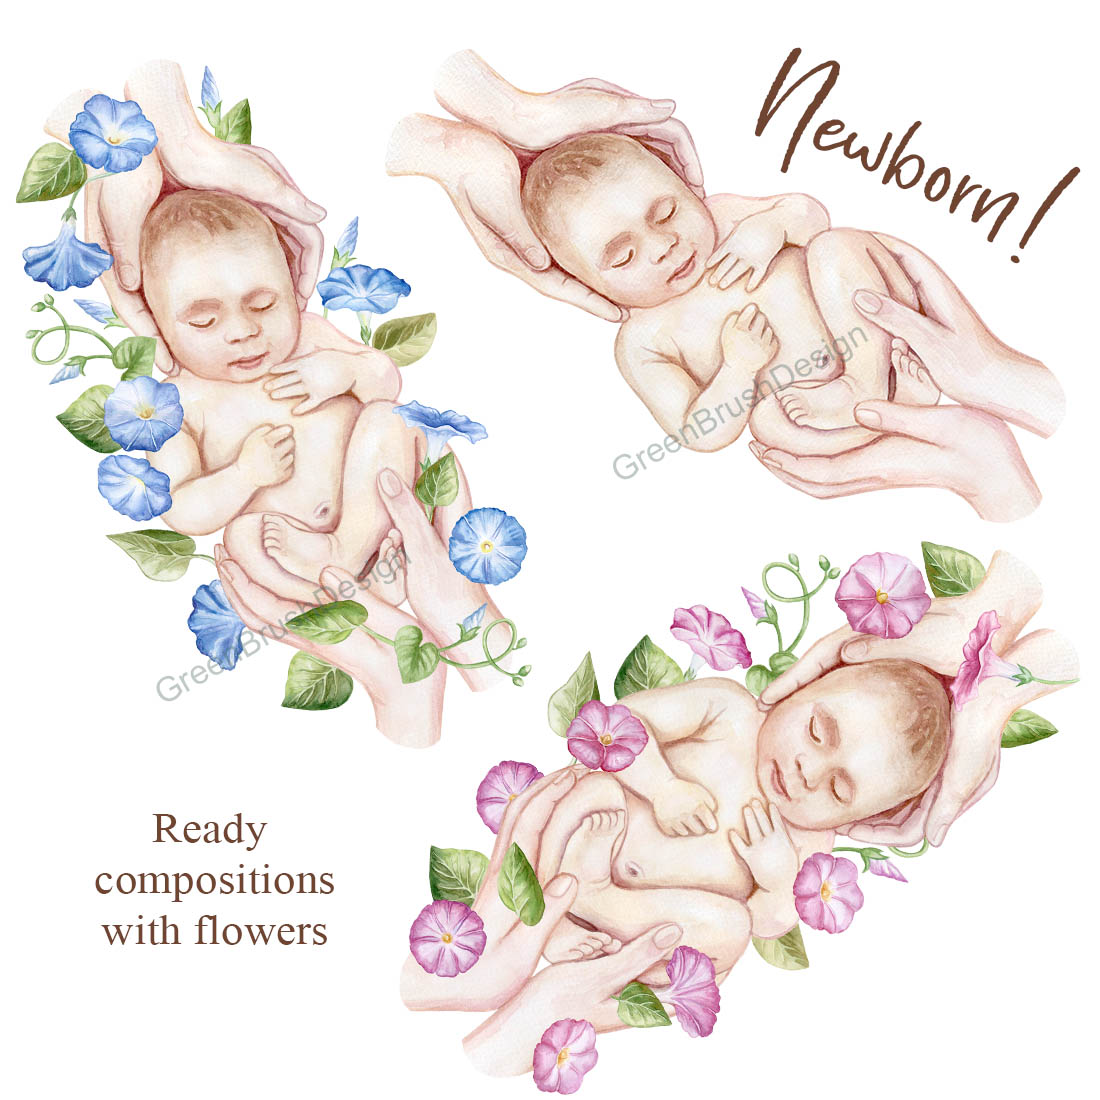 Newborn in Parental Hands Family cover image.